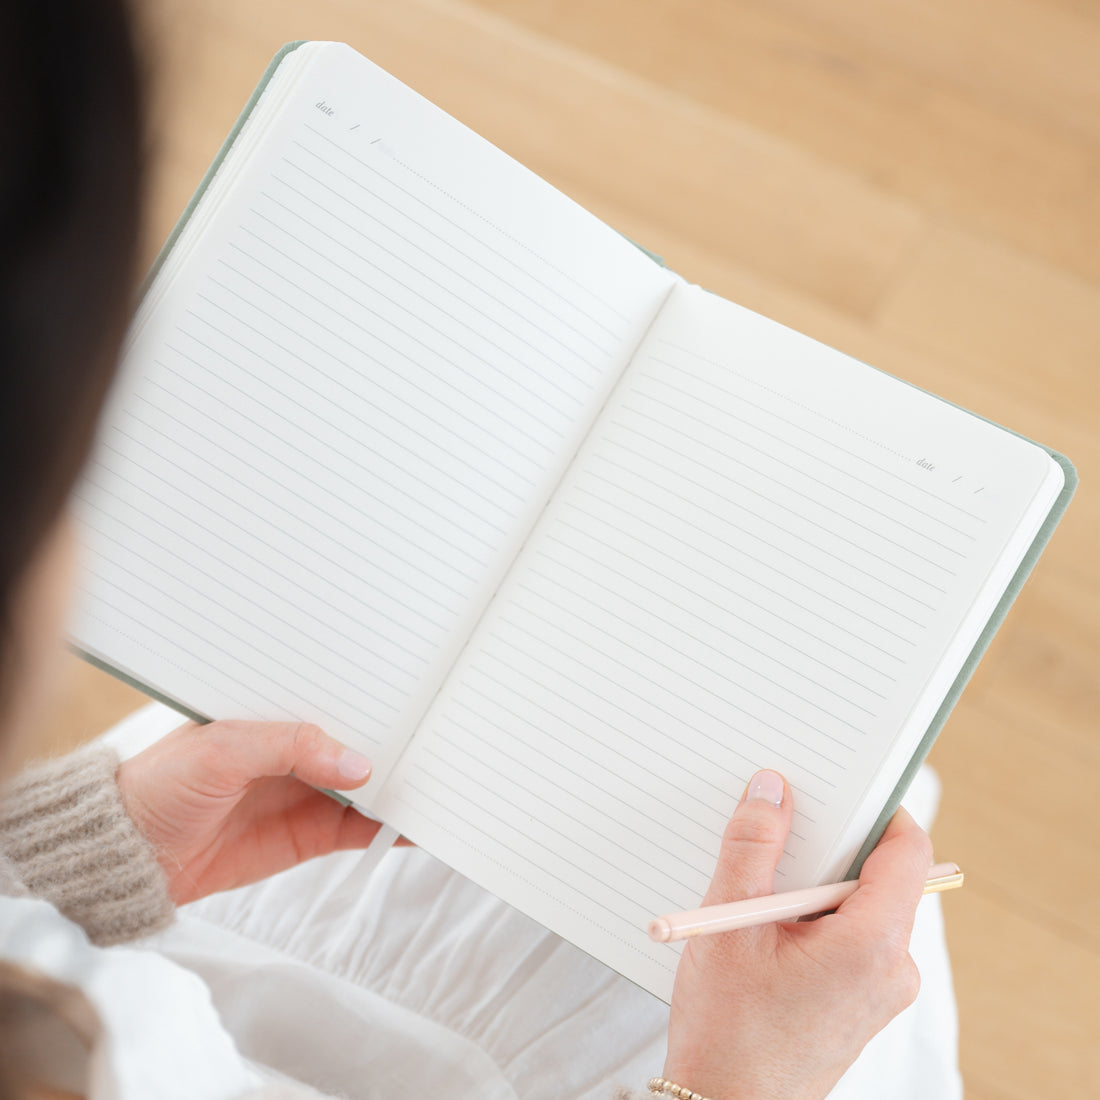 Our Favorite Journaling Prompts